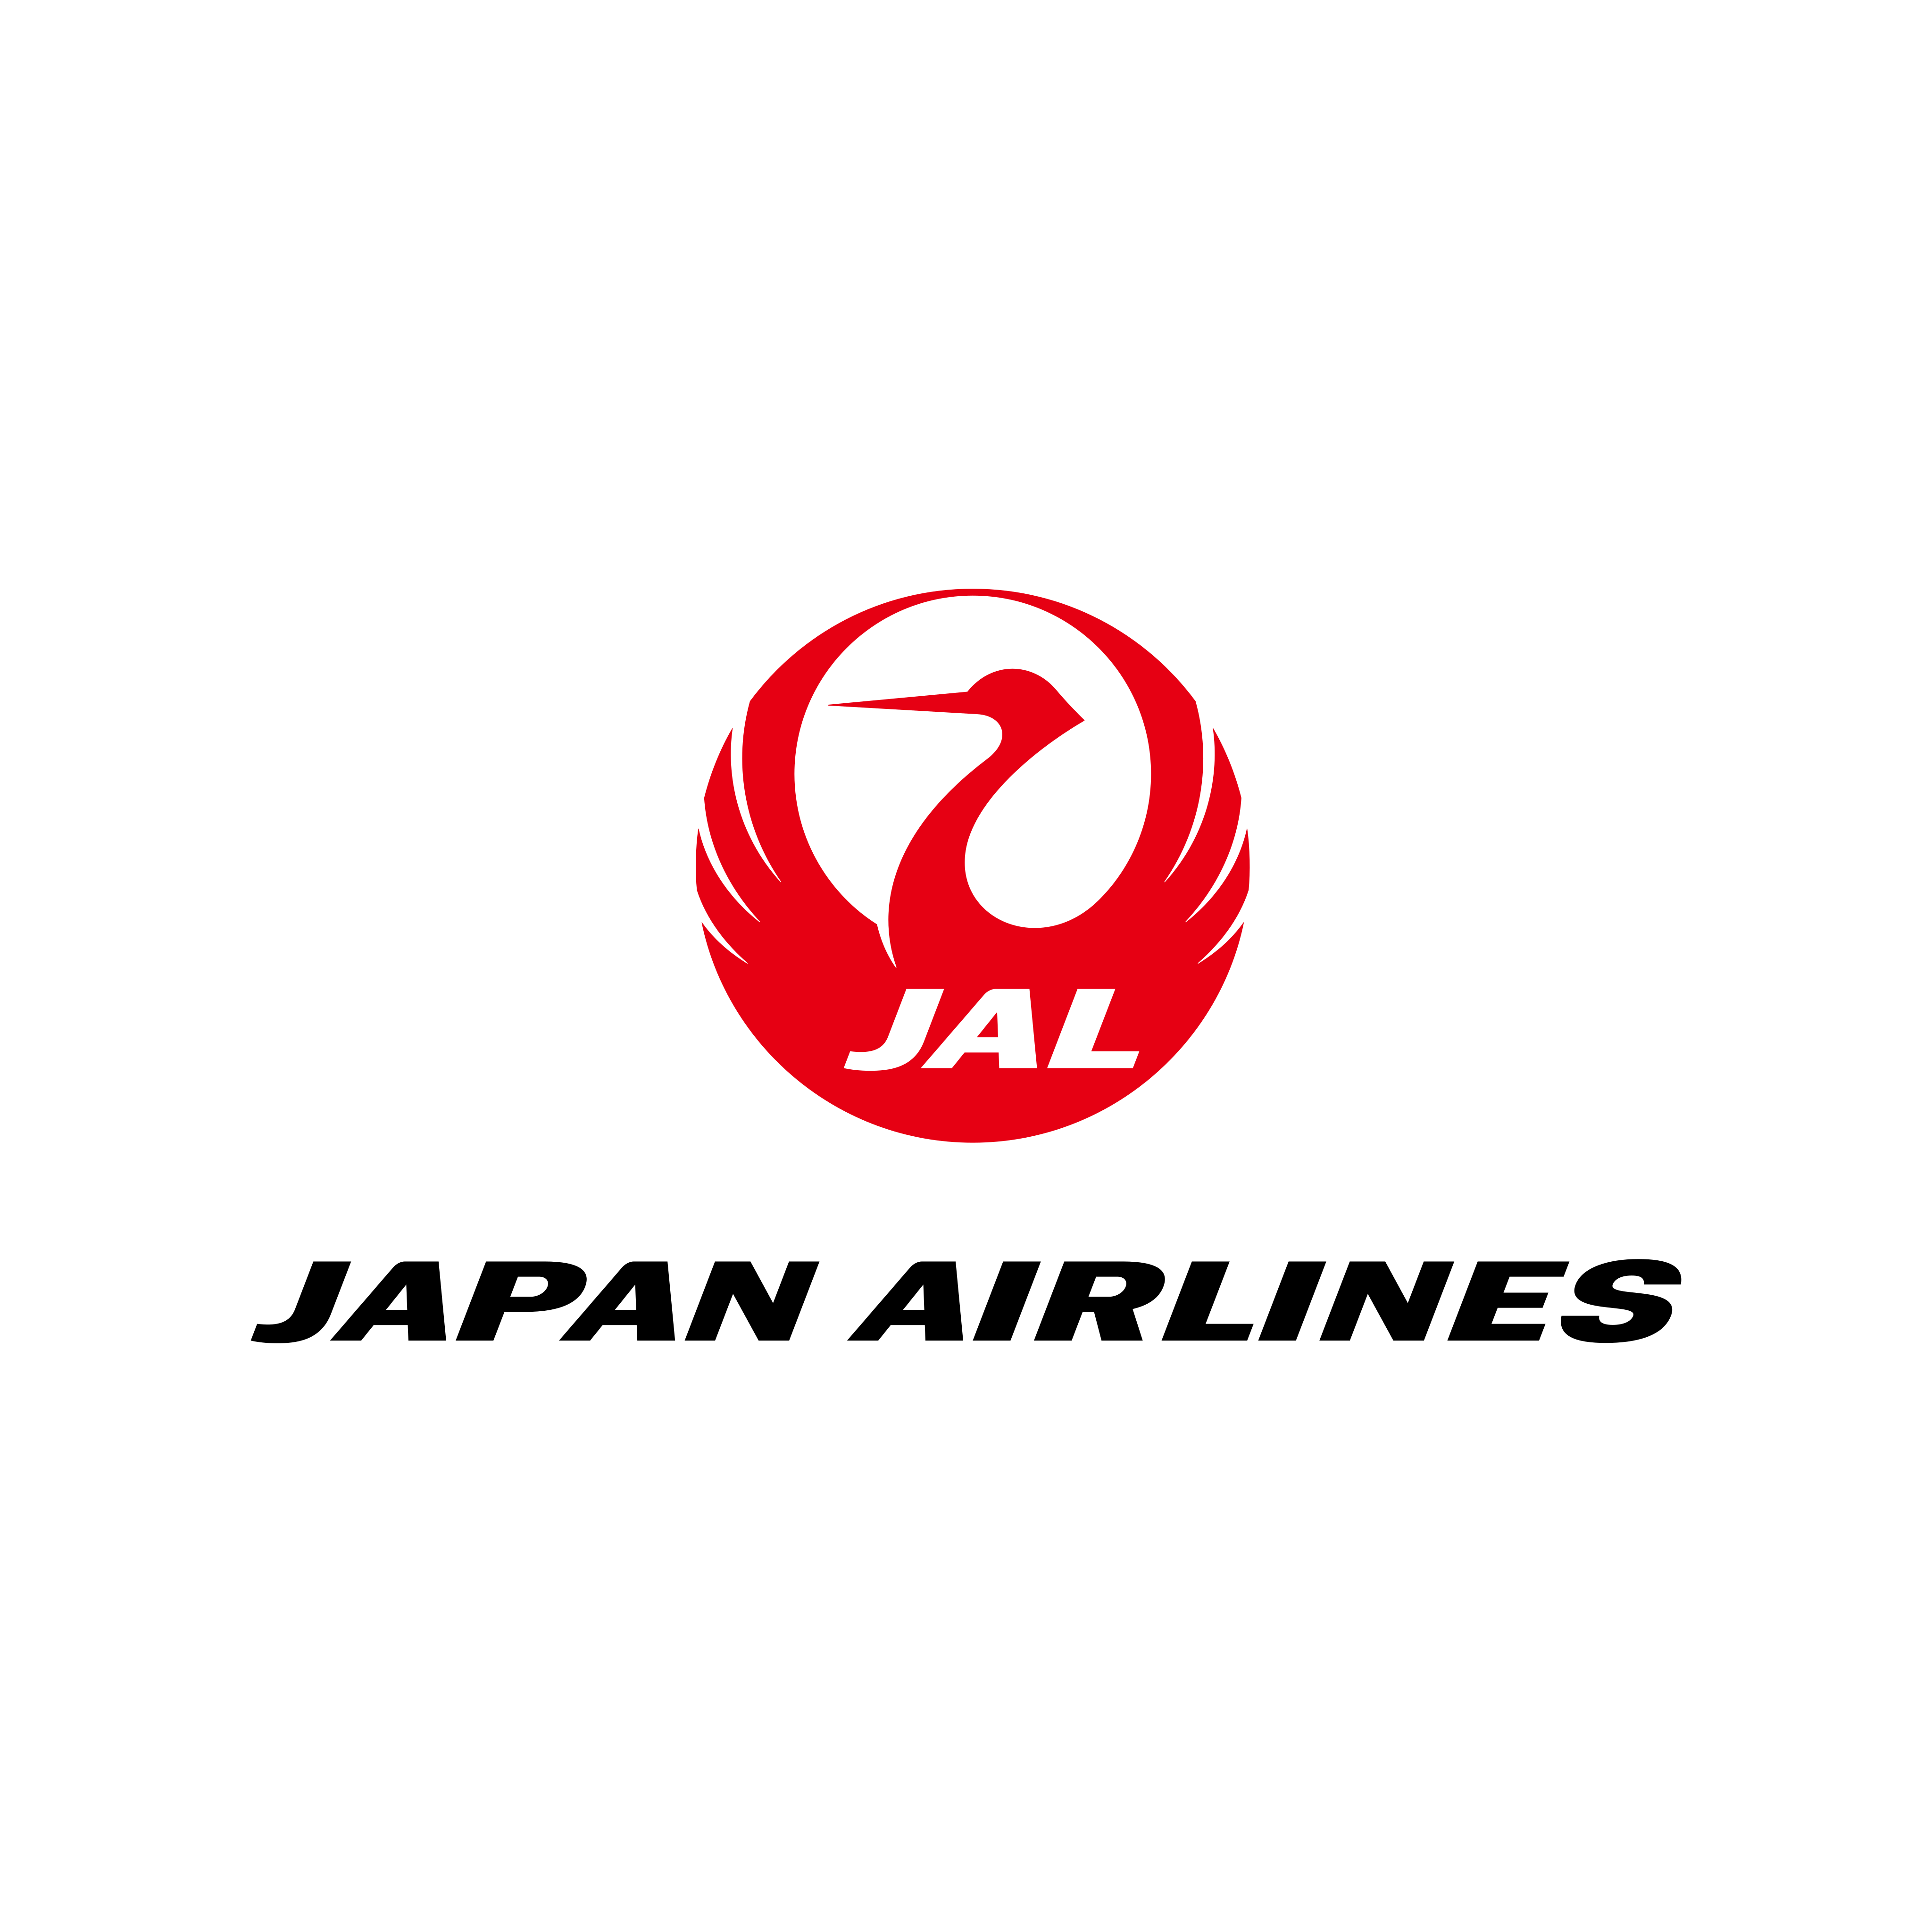 Japan Airlines Logo PNG.